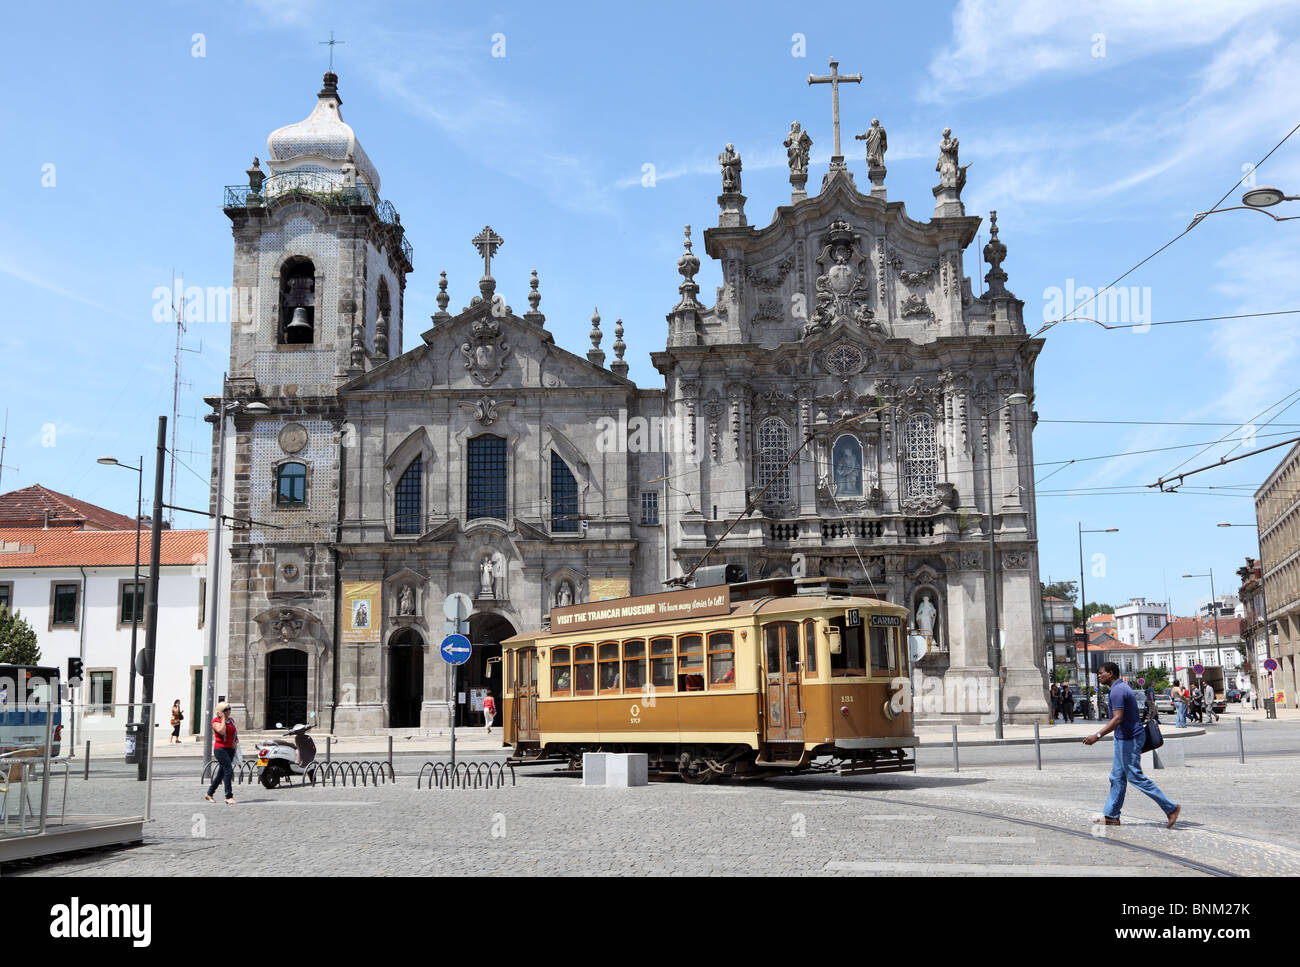 Old trolley car in front of a church in Porto, Portugal Stock Photo